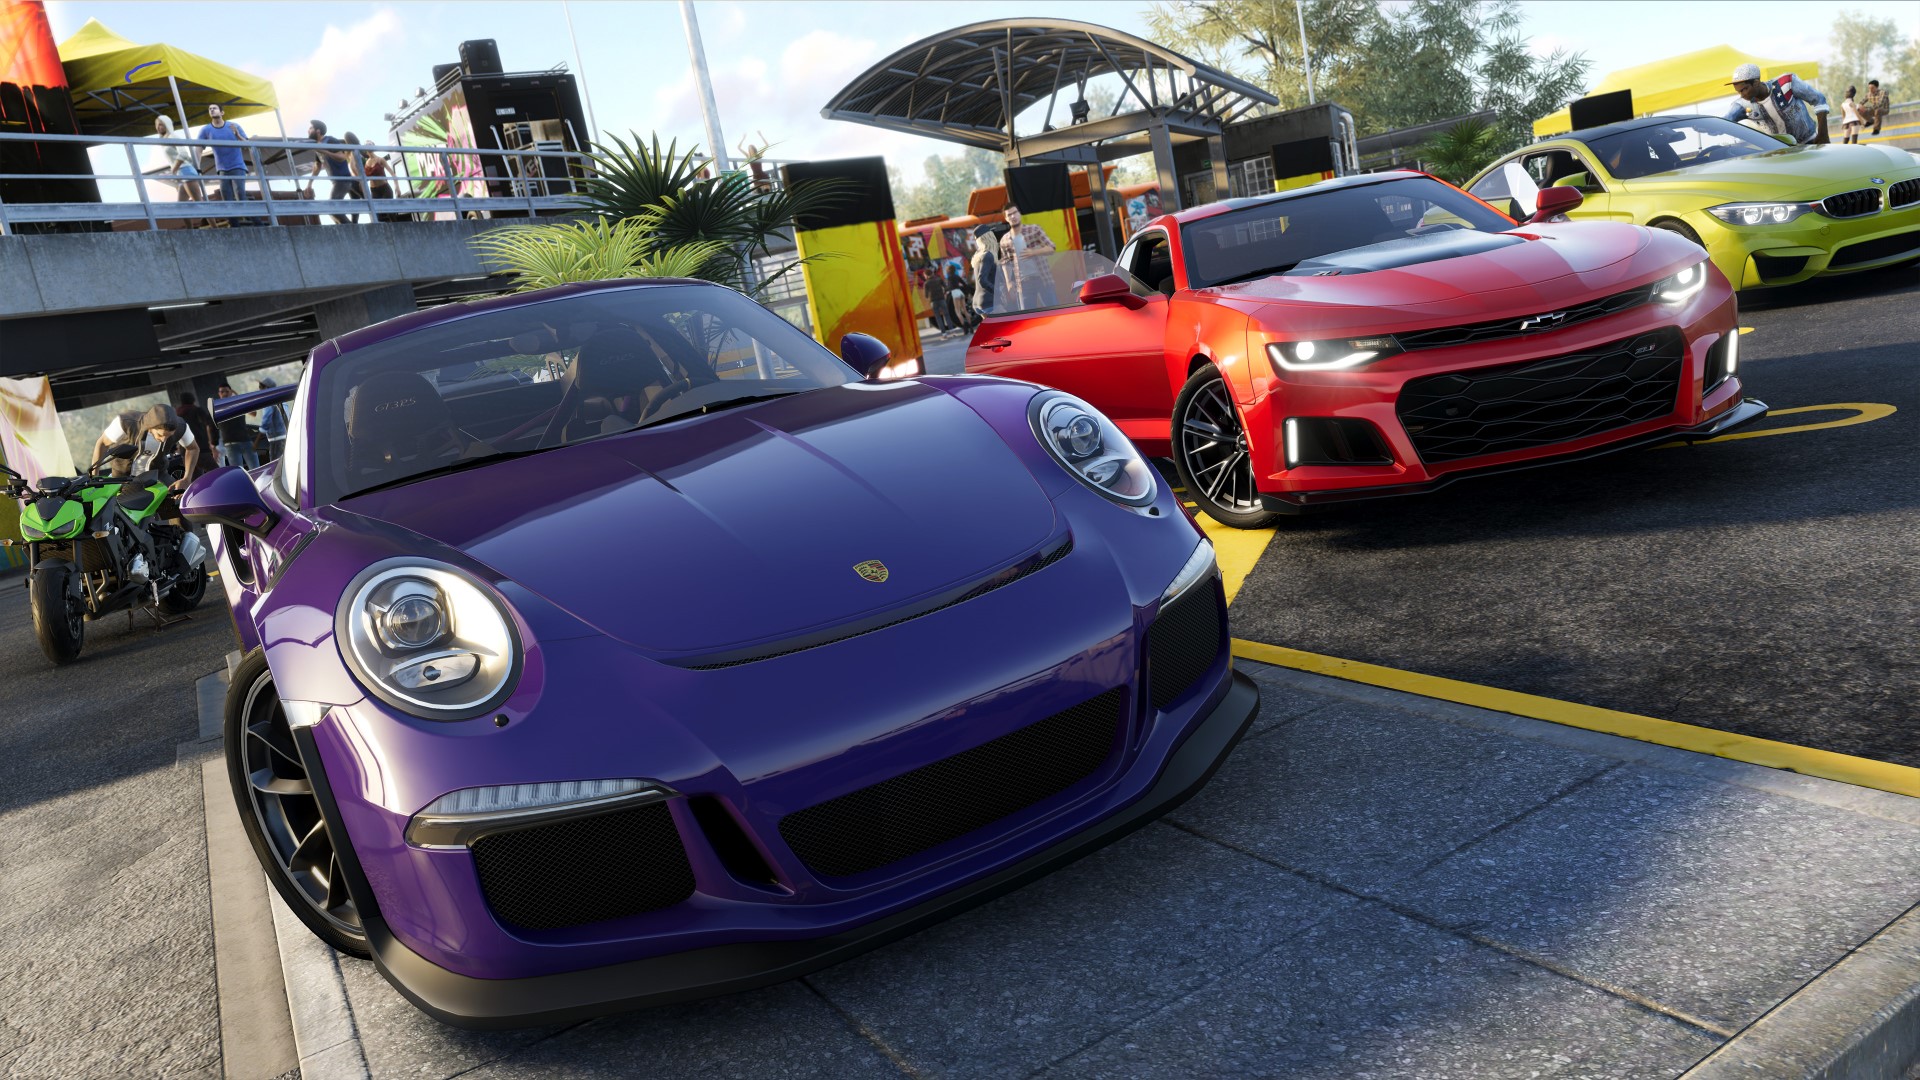 A new The Crew game is about to be announced